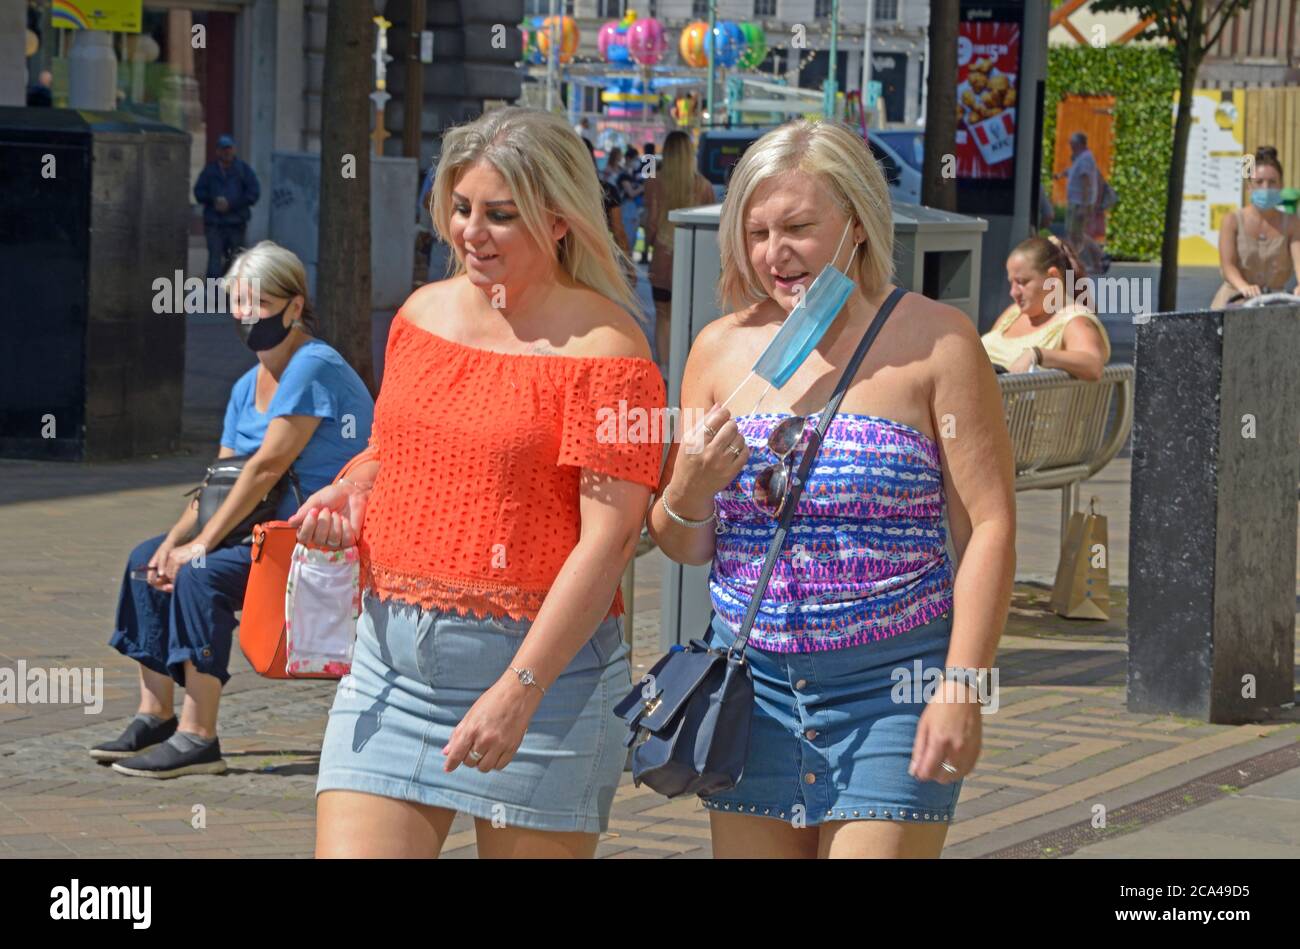 Chubby women out shopping, post lockdown, one with mask. Stock Photo